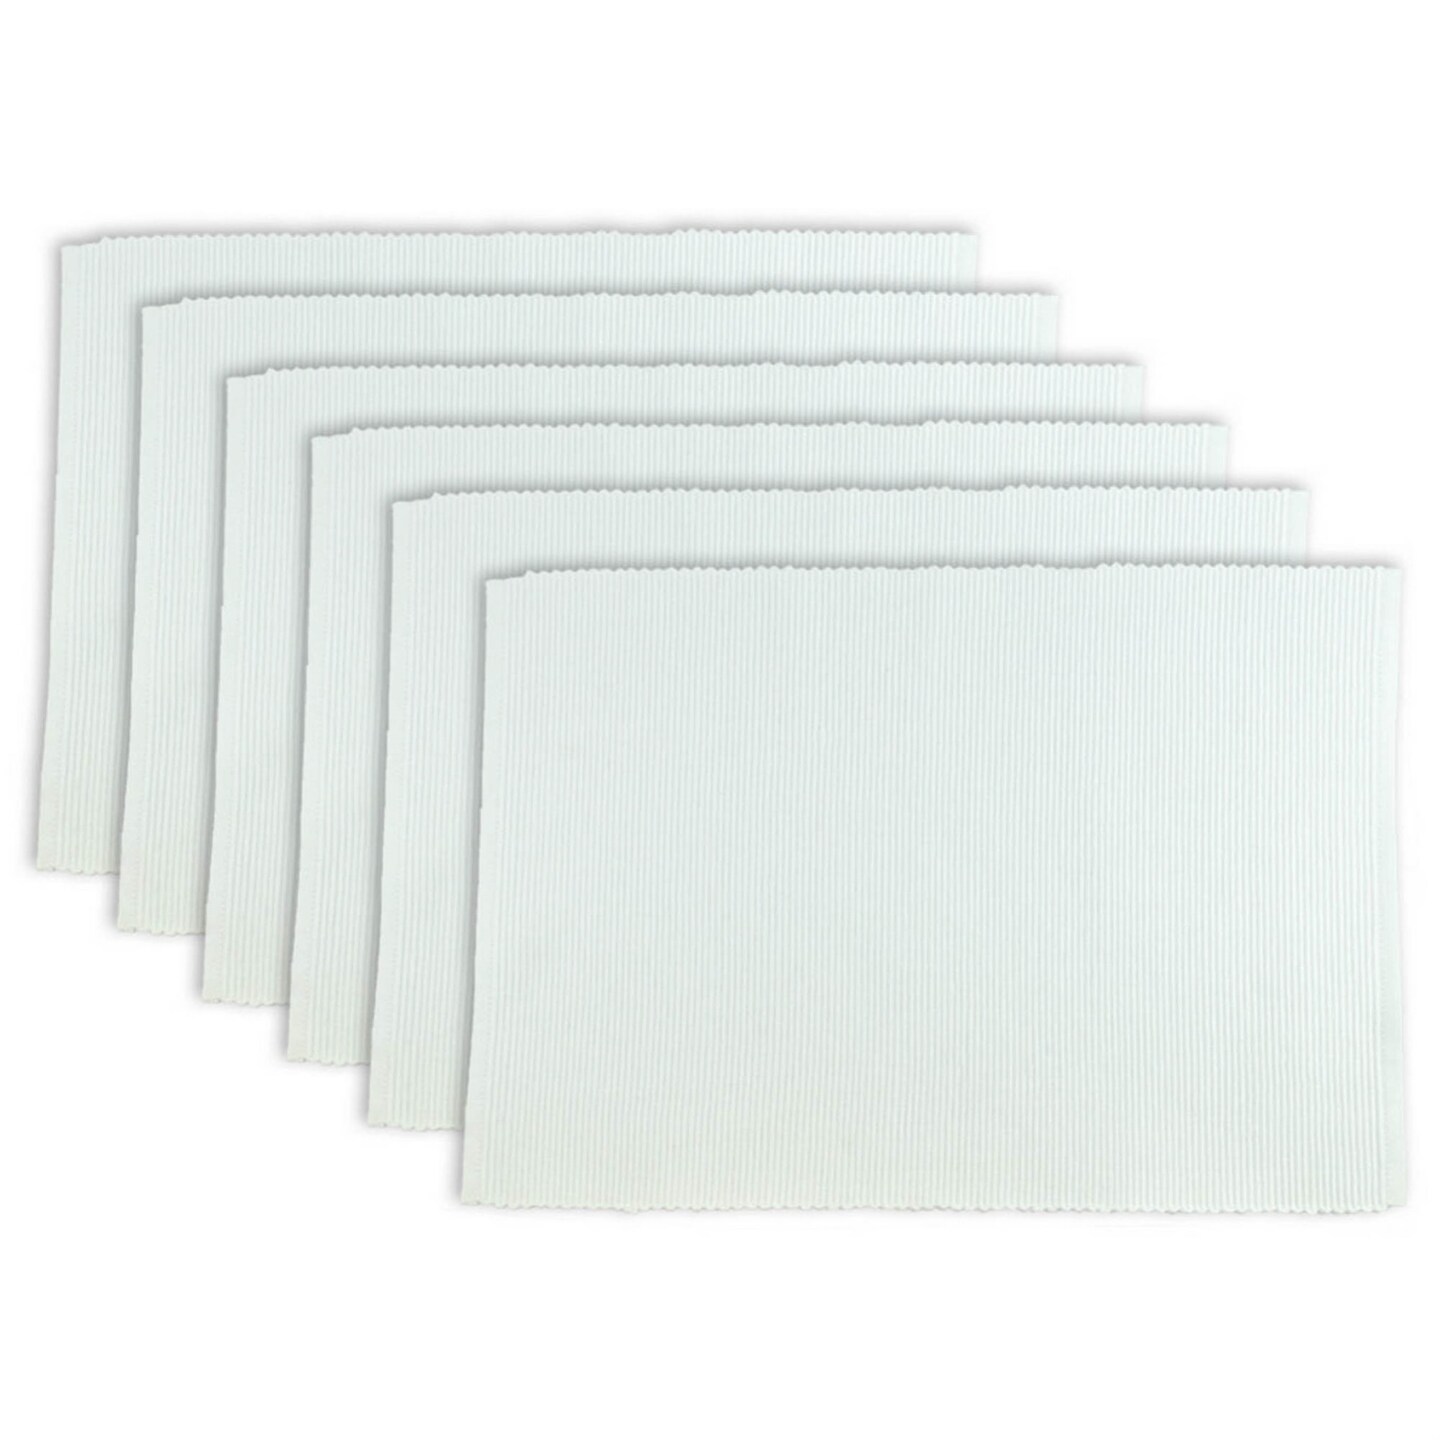 PLACEMAT WHITE Set of 6